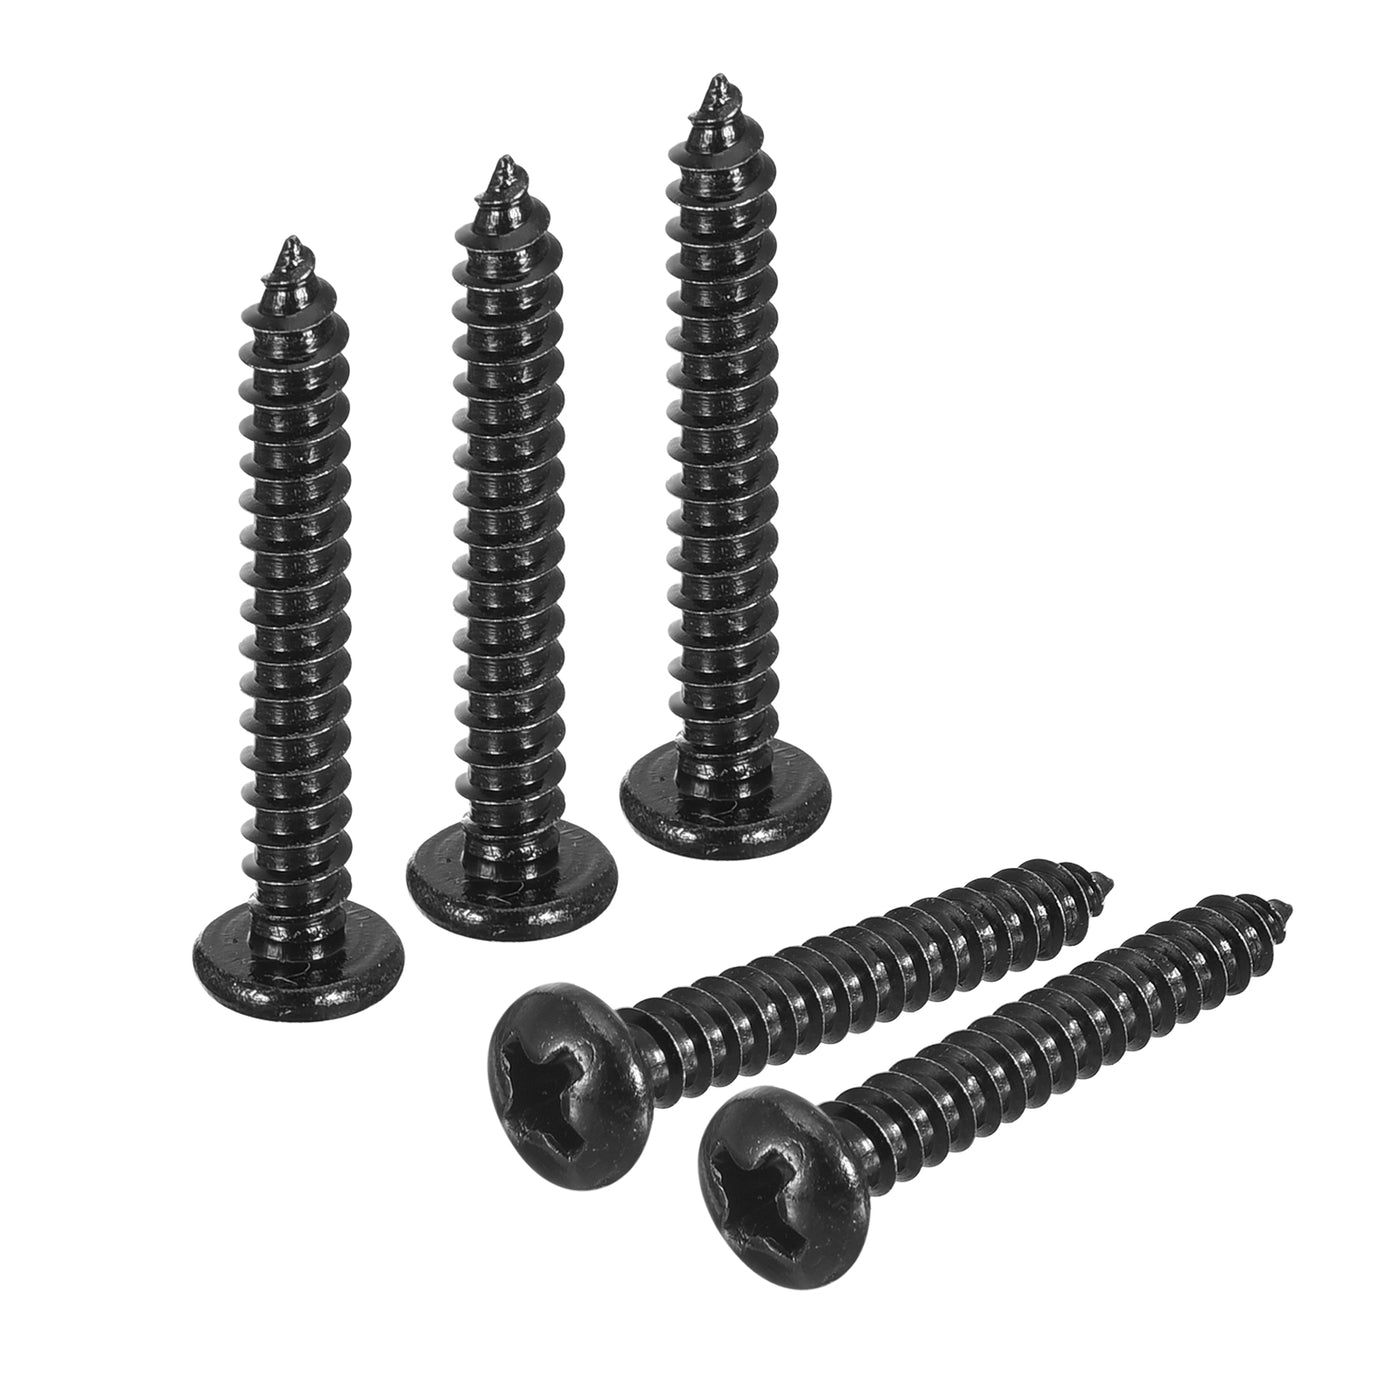 uxcell Uxcell #6 x 1" Phillips Pan Head Self-tapping Screw, 100pcs - 304 Stainless Steel Round Head Wood Screw Full Thread (Black)